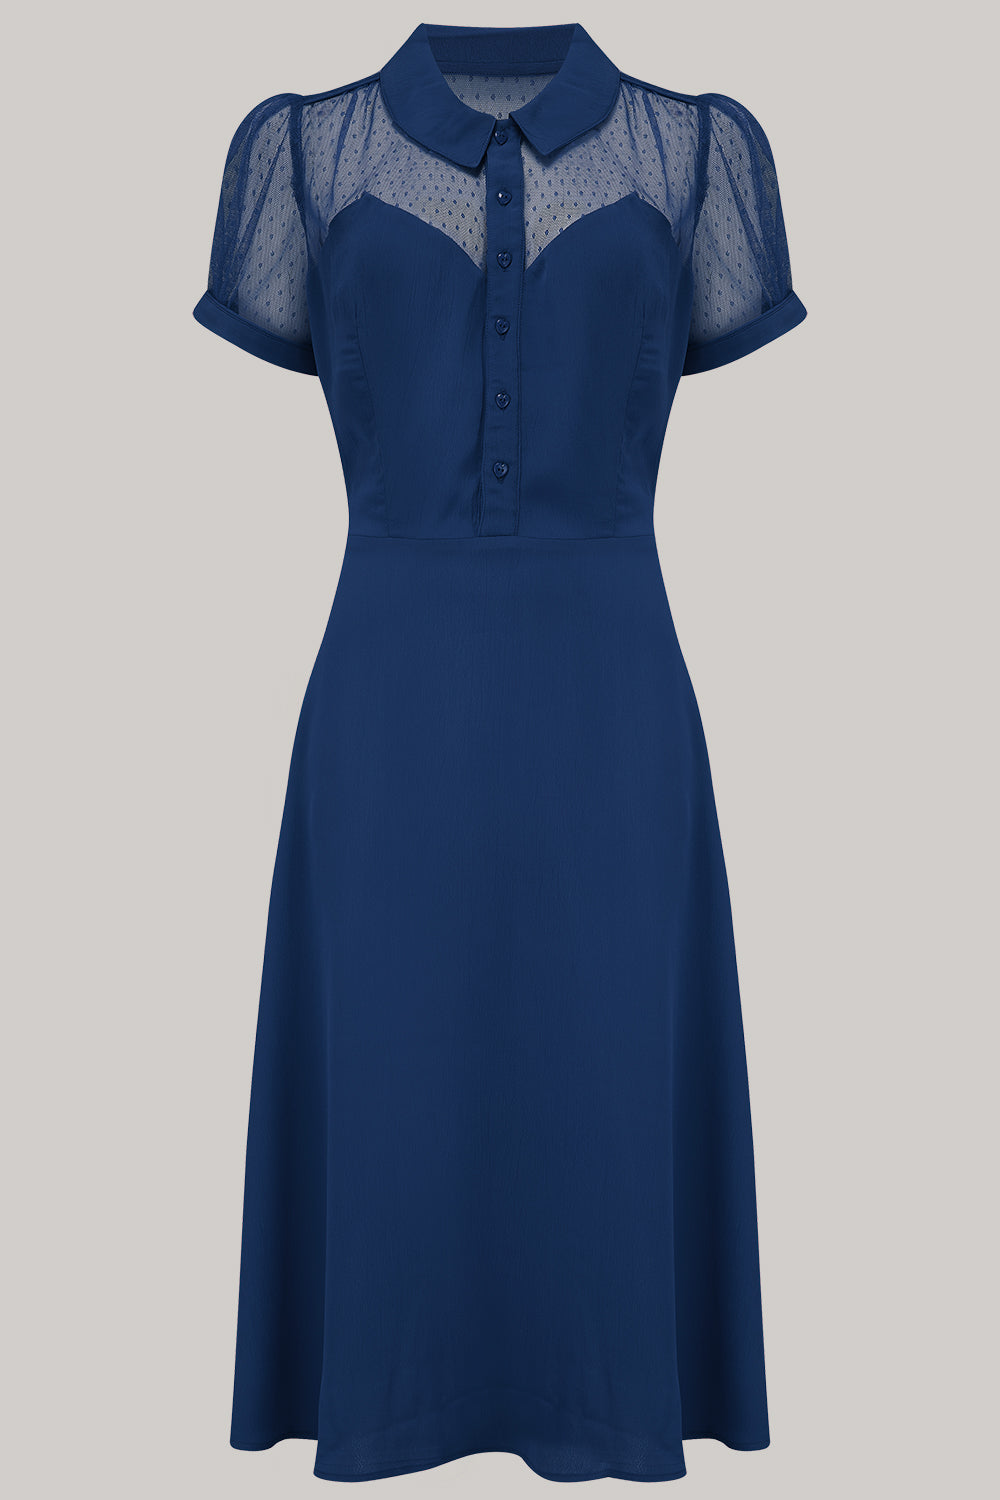 "Florance" Tea Dress in Navy with matching Navy Lace upper, Authentic 1940s true vintage style - CC41, Goodwood Revival, Twinwood Festival, Viva Las Vegas Rockabilly Weekend Rock n Romance The Seamstress Of Bloomsbury